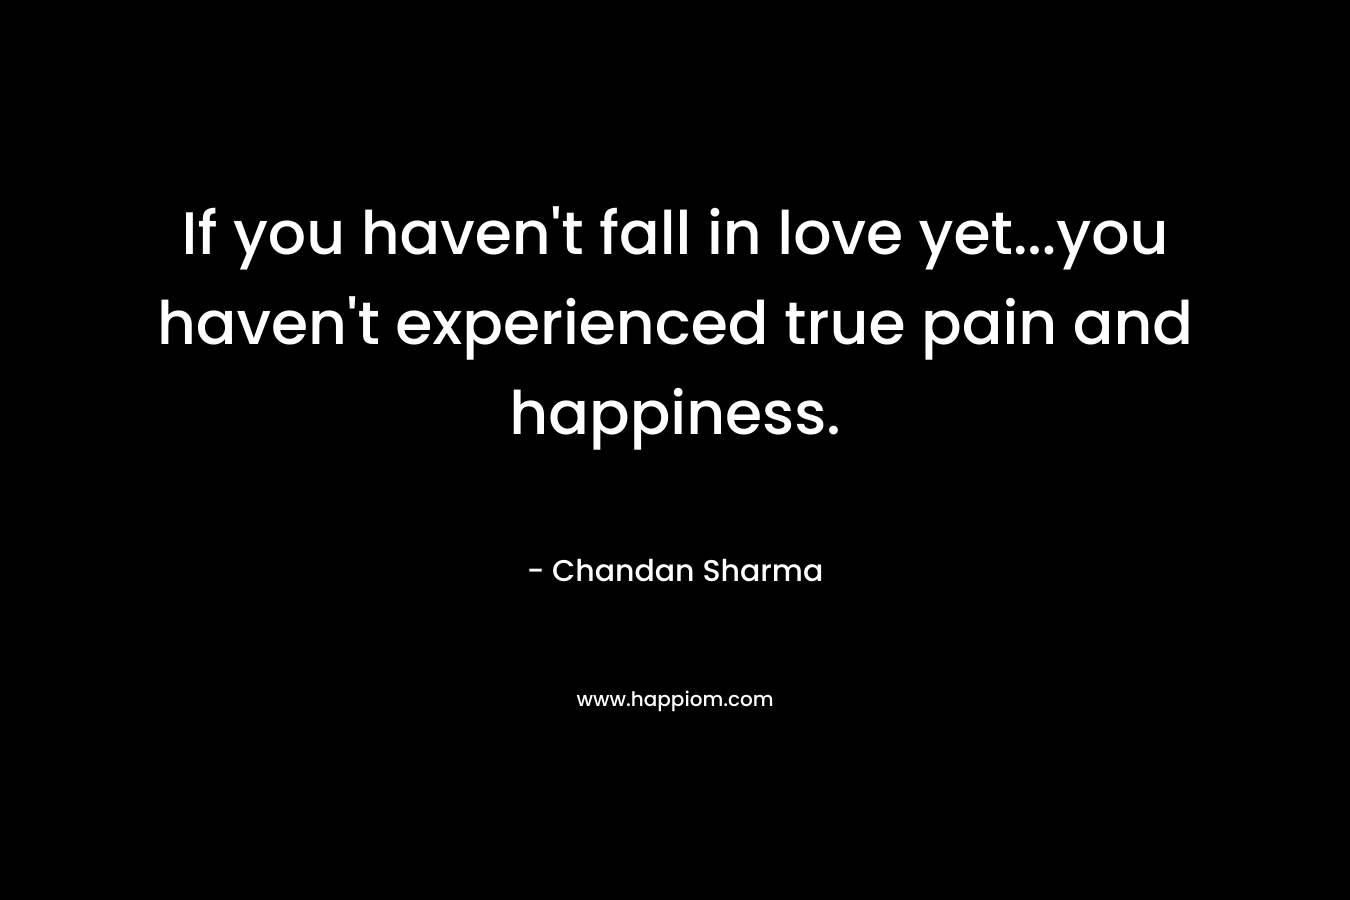 If you haven’t fall in love yet…you haven’t experienced true pain and happiness. – Chandan Sharma